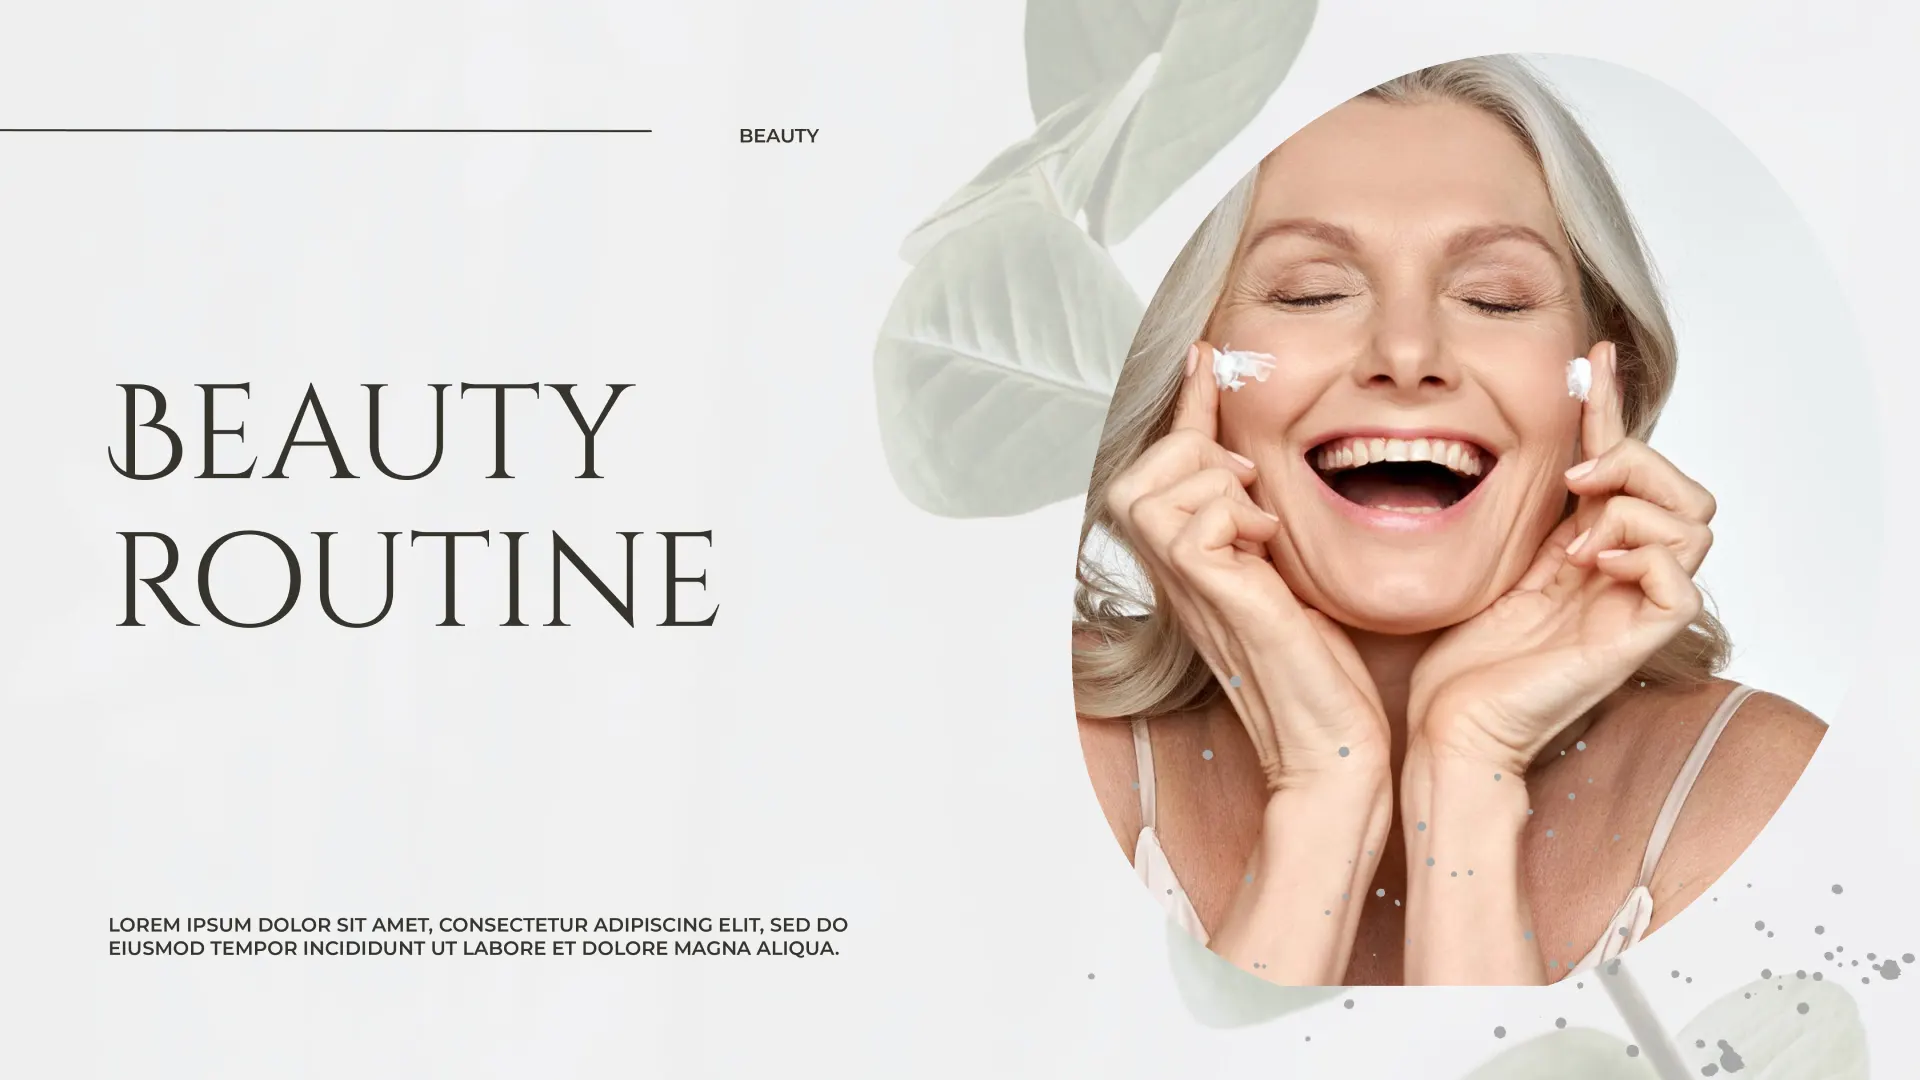 Beauty routine template